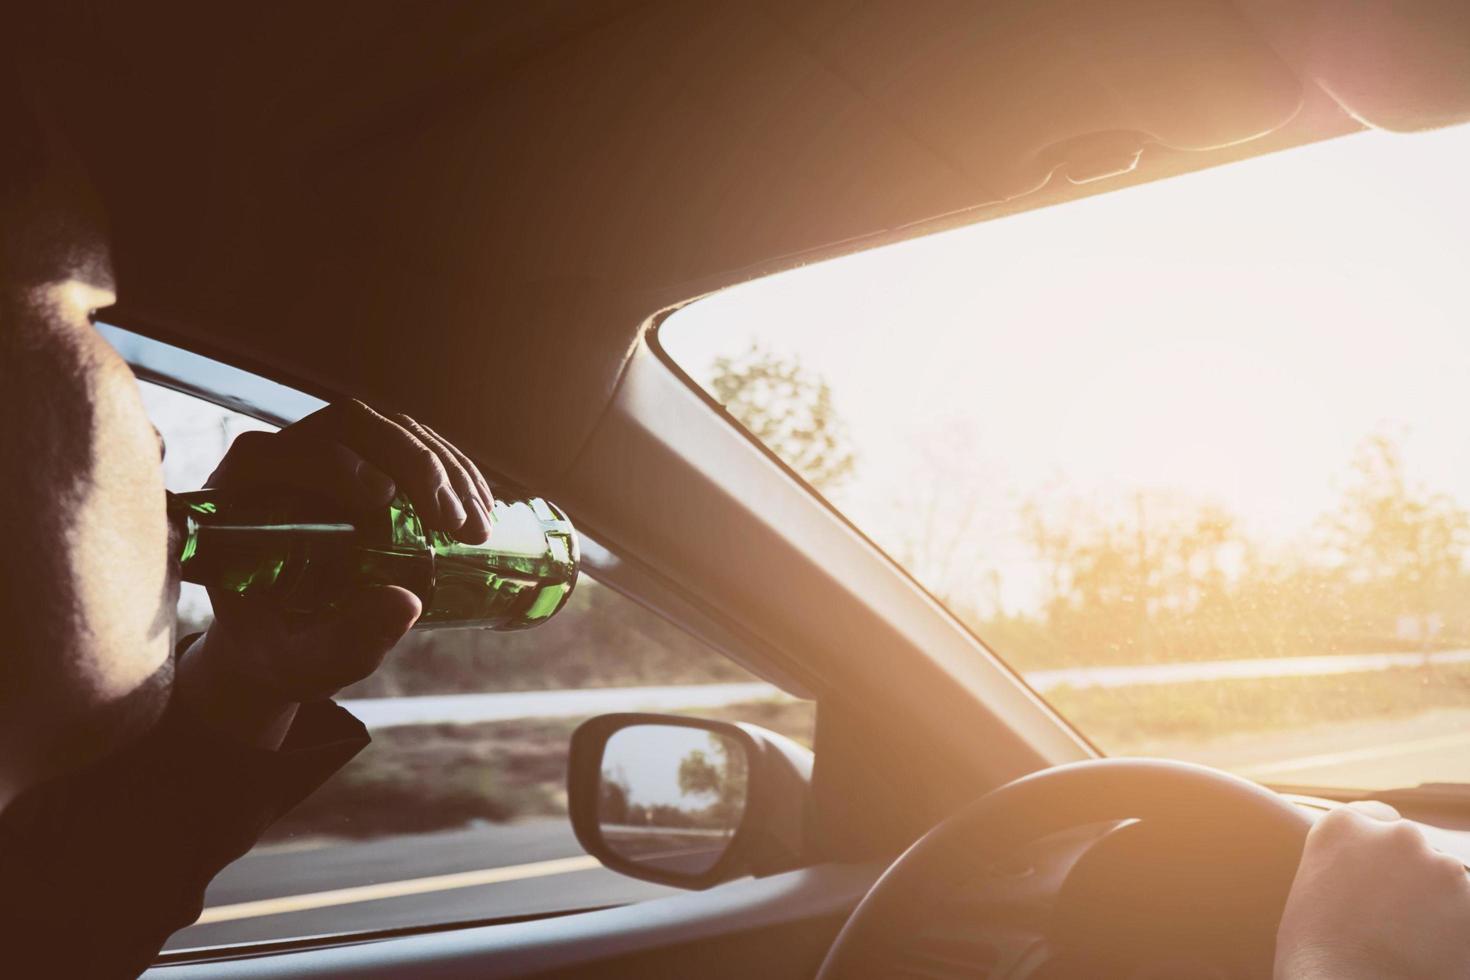 Man drinking beer while driving a car photo